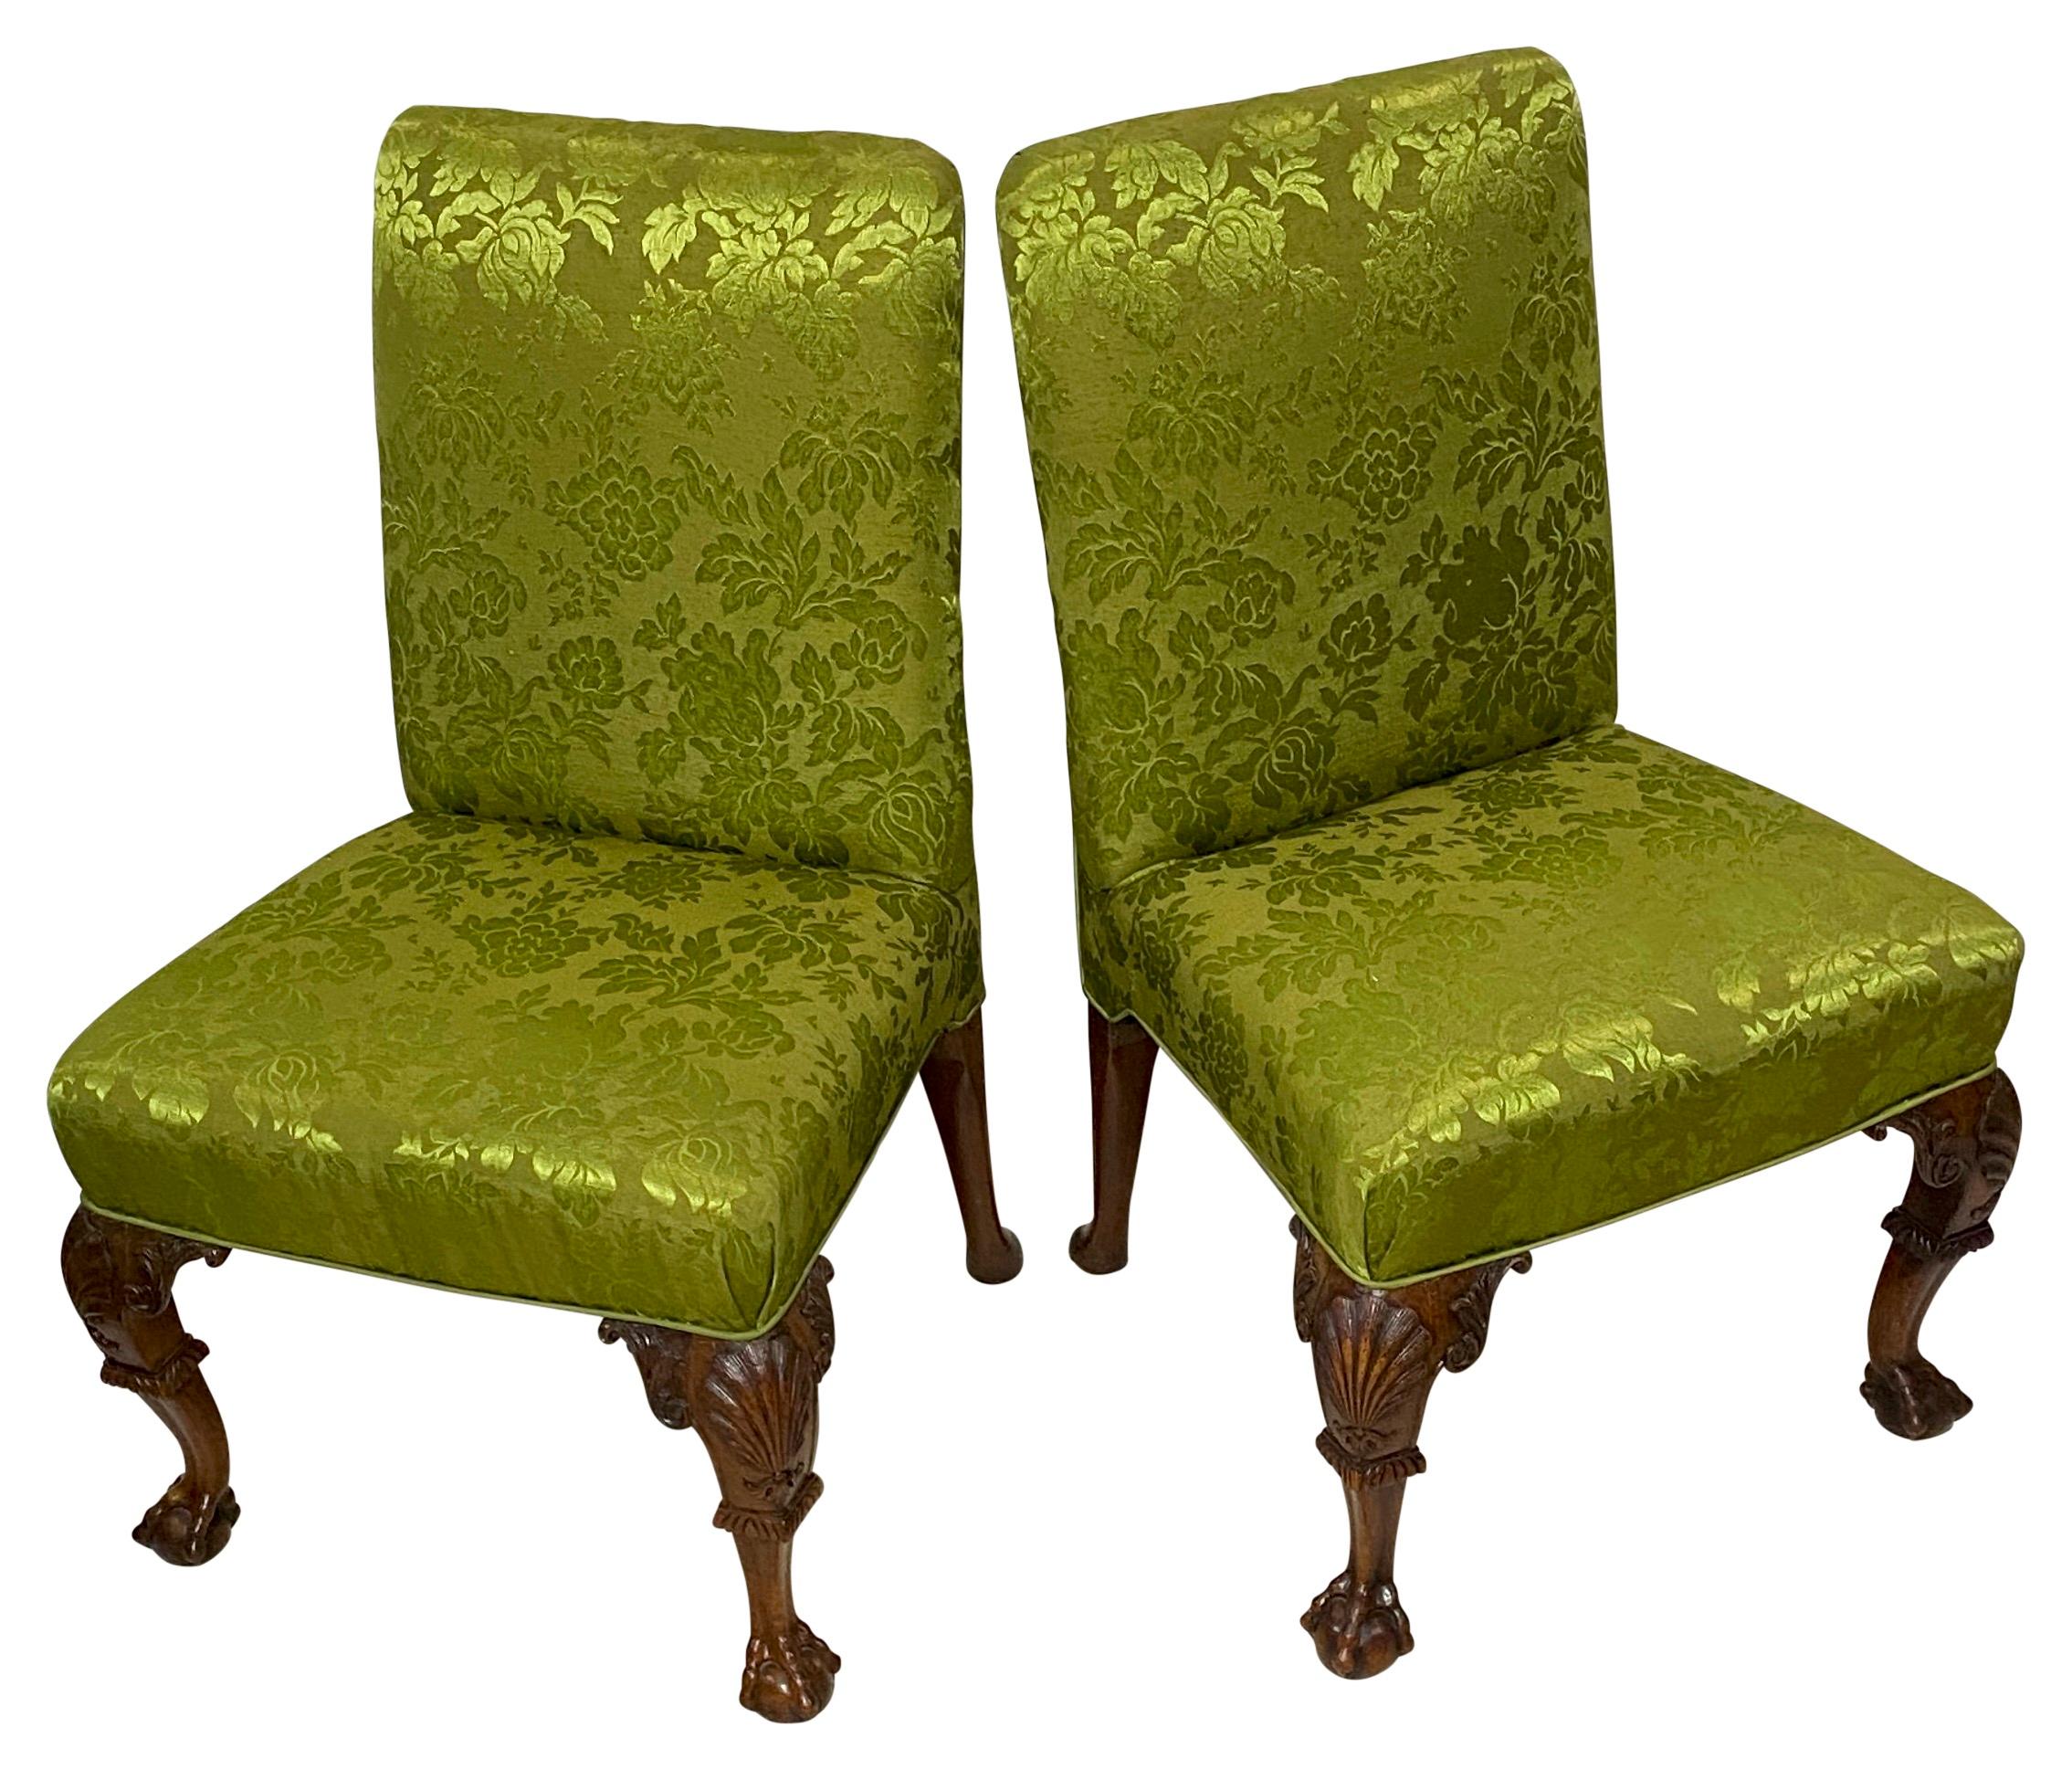 A pair of mahogany claw and ball Chippendale period side chairs. These chairs have broad generous seats, recently re-upholstered. Very strong, solid, and extremely comfortable.
In superb condition. 
England 18th century.